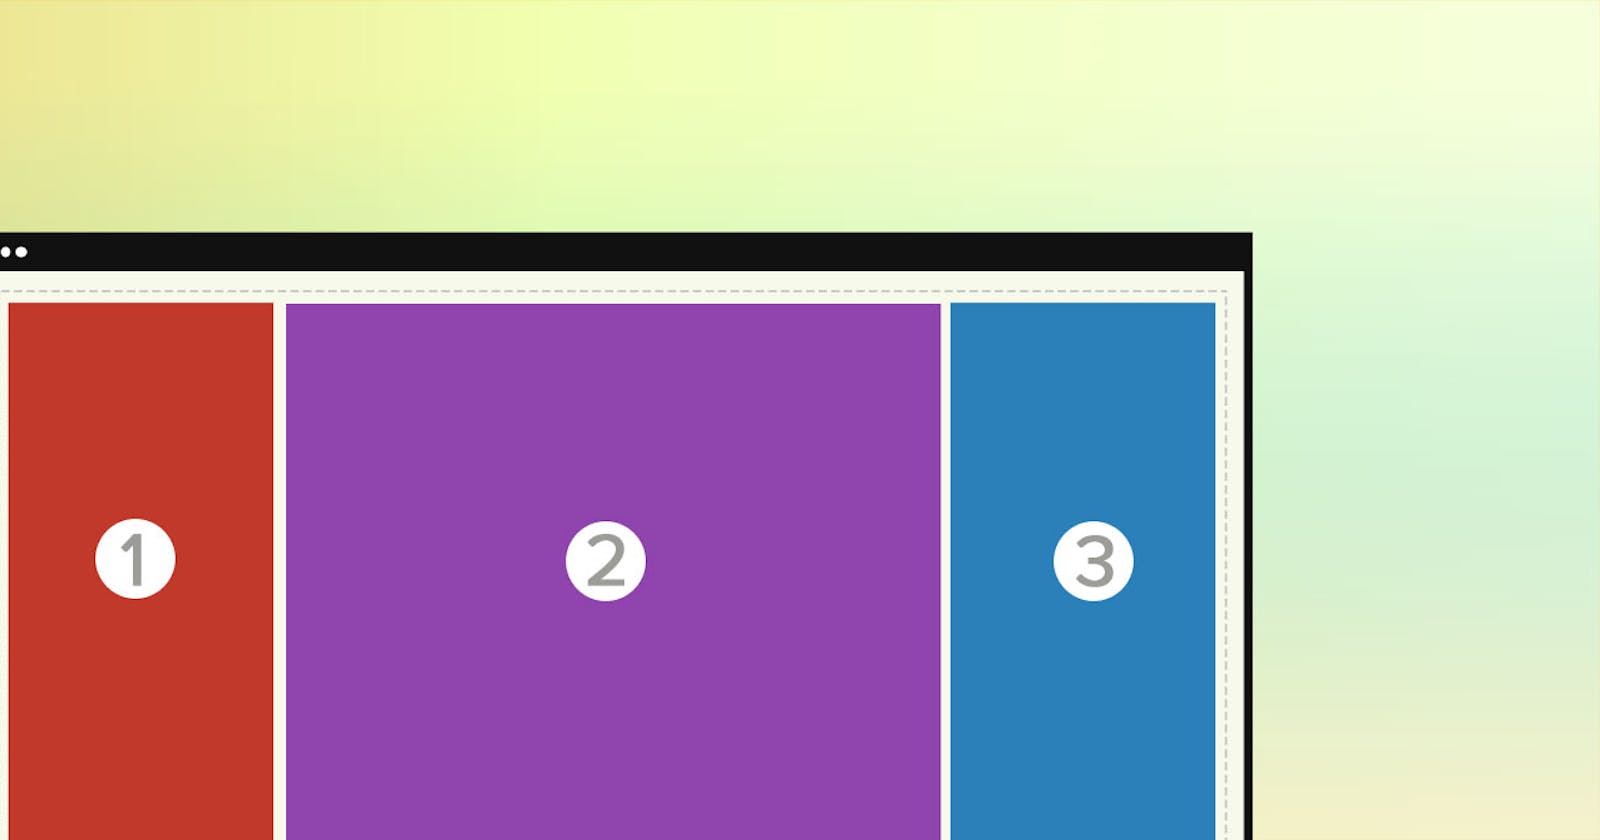 Master CSS Flexbox in 5 Simple Steps - Web Designer Wall - Design Trends and Tutorials